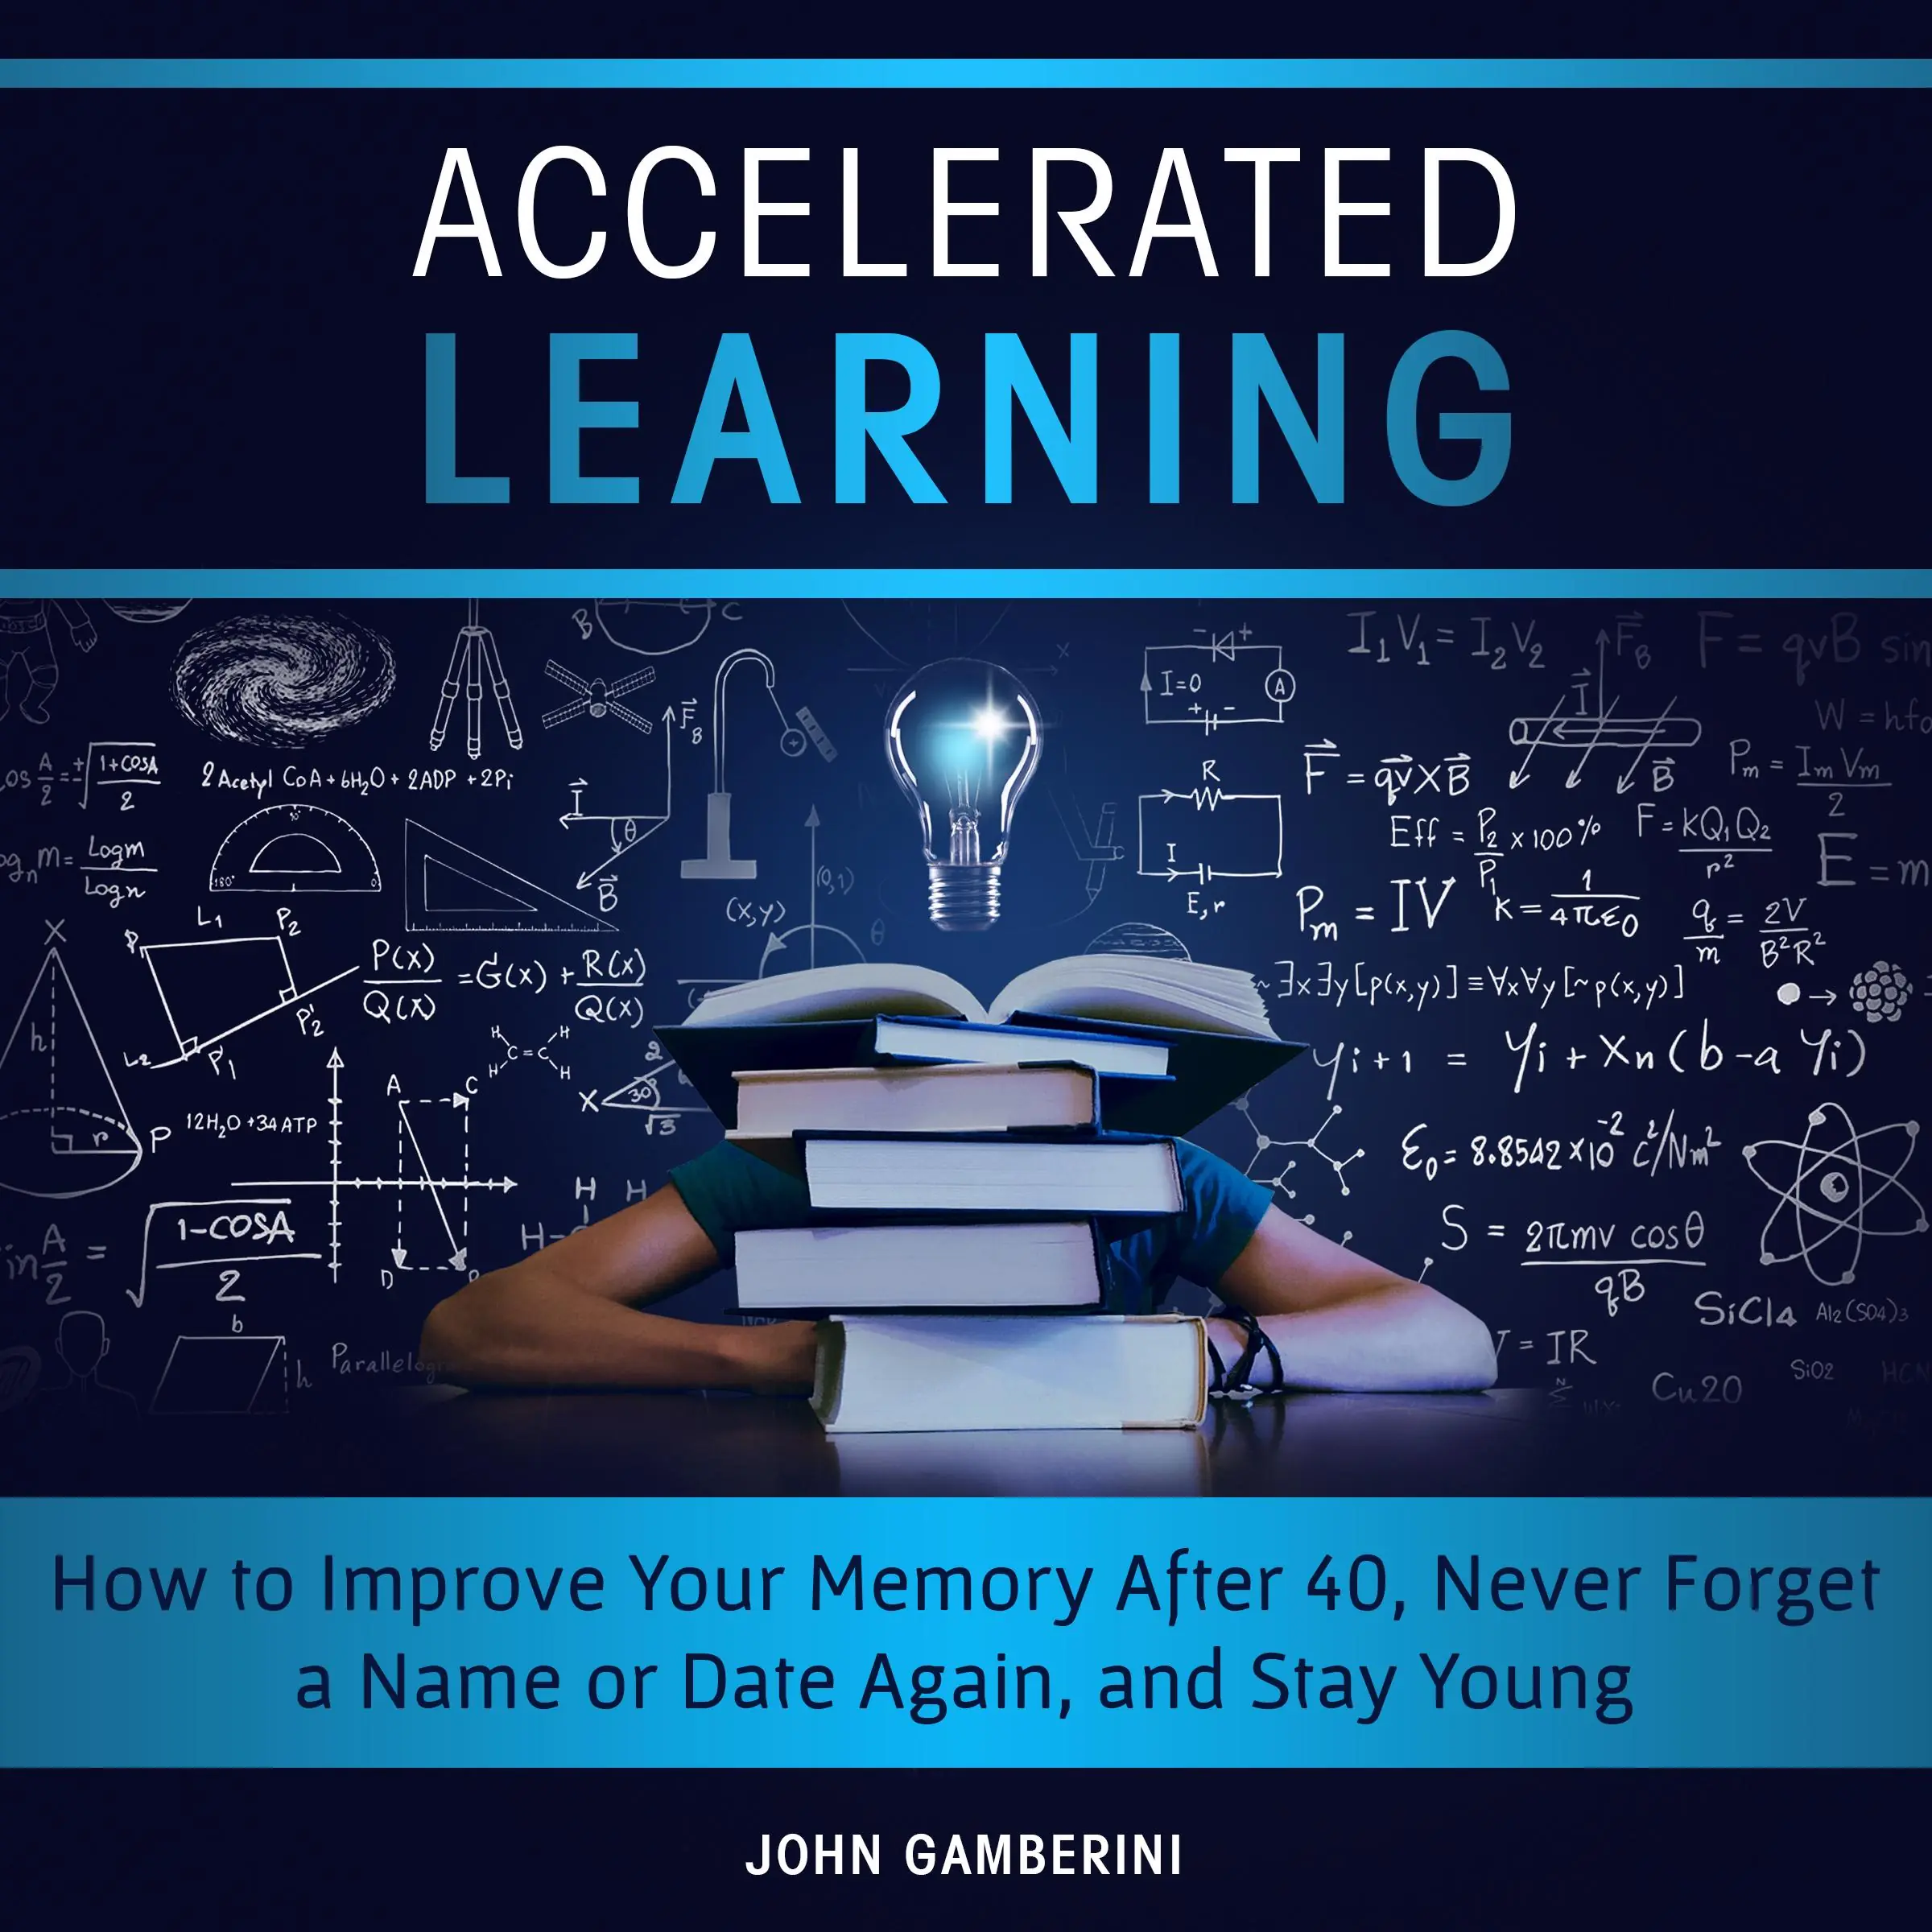 Accelerated Learning How to Improve Your Memory After 40, Never Forget a Name or Date Again, and Stay Young by John Gamberini Audiobook